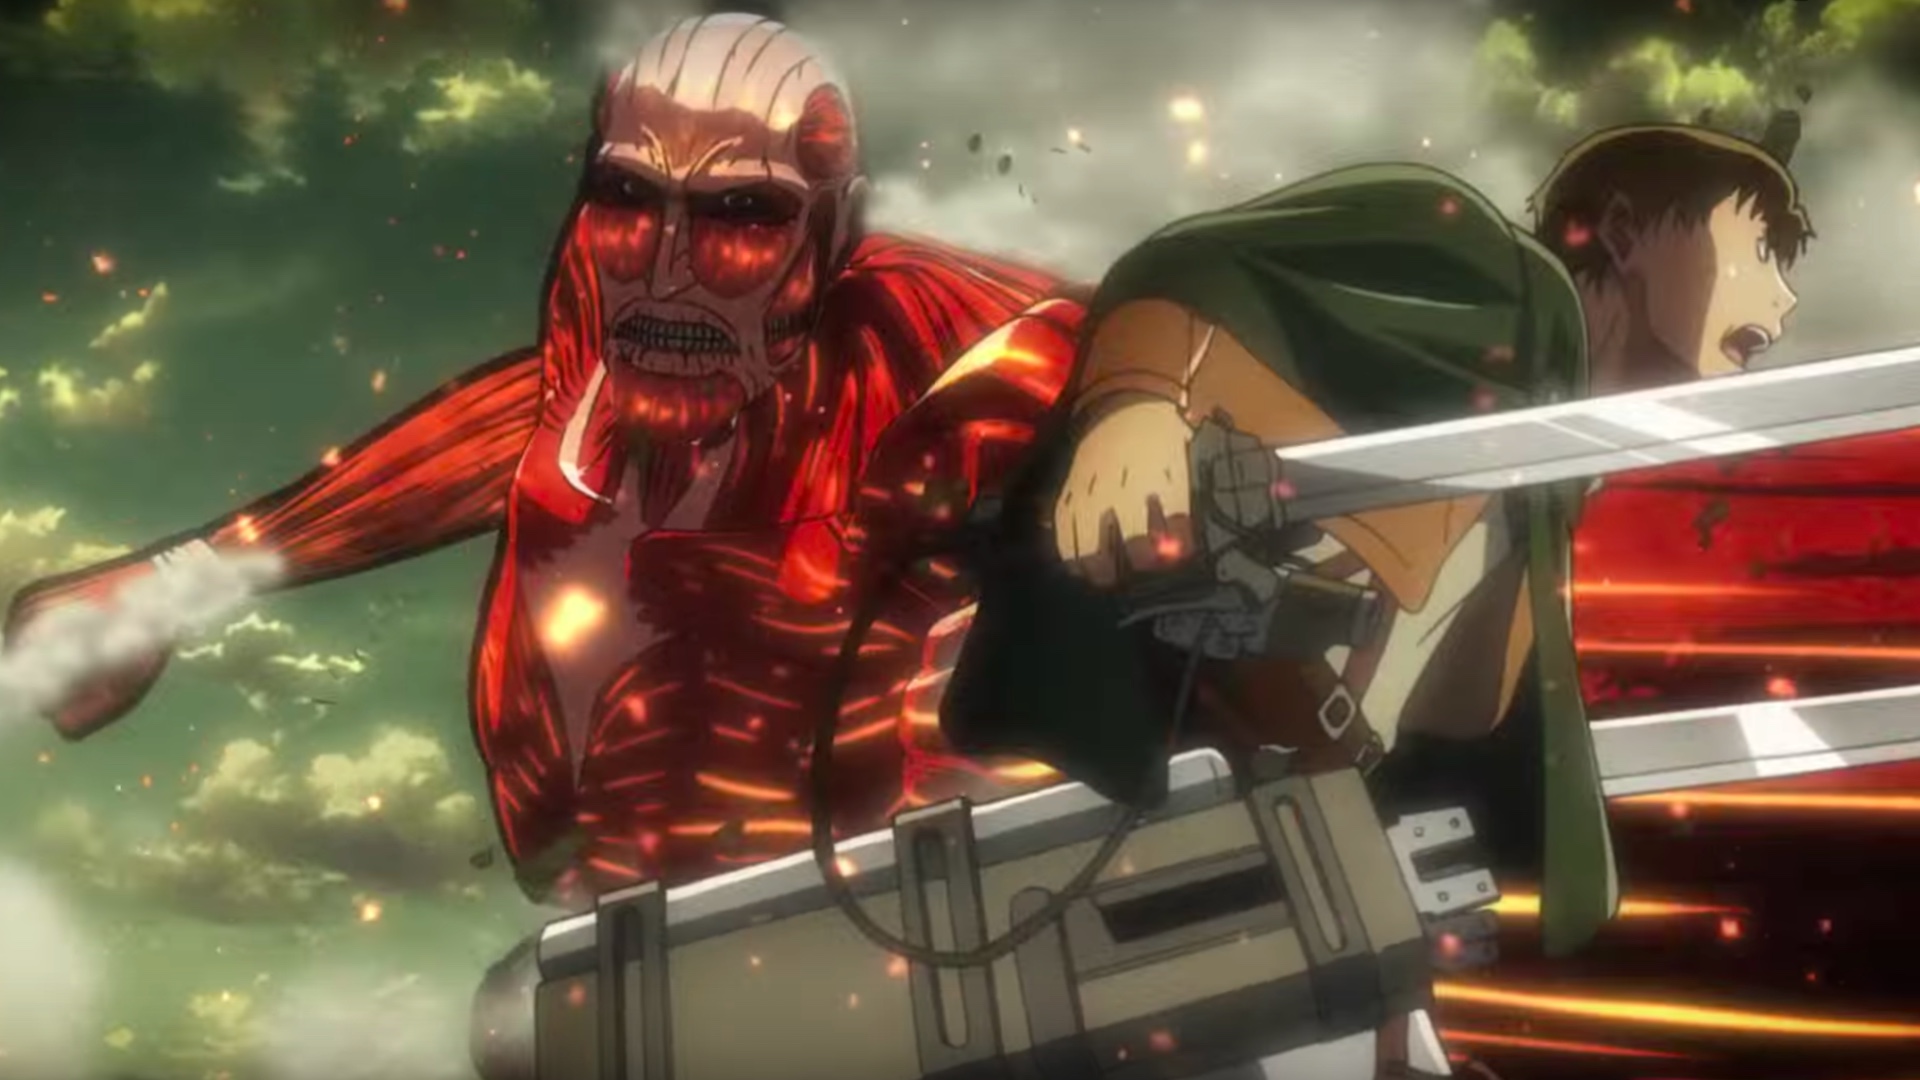 Attack On Titan' Season 2 Preview Hints Titans Packed Within The